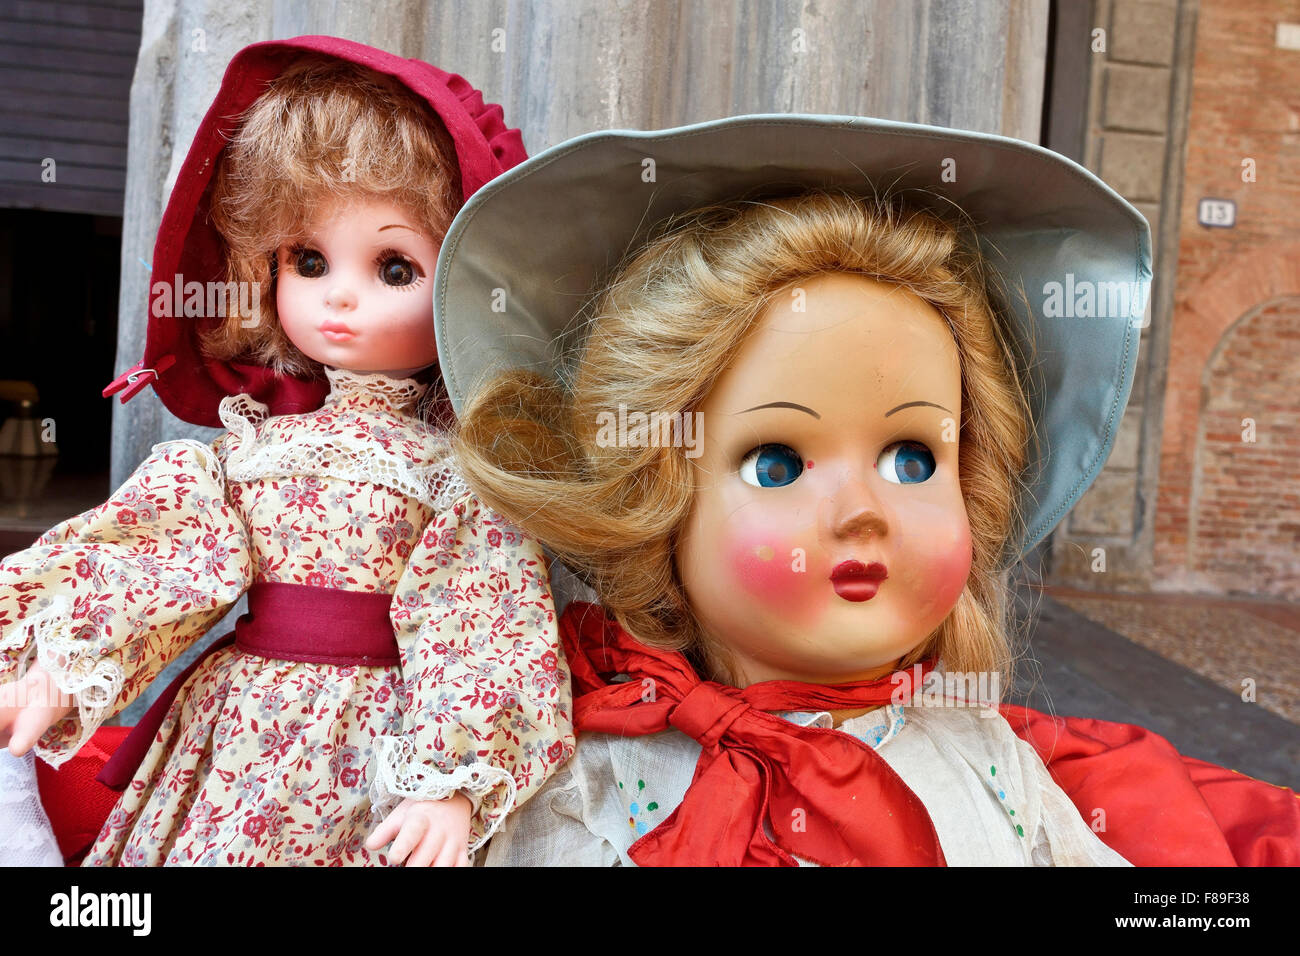 Vintage Dolls High Resolution Stock Photography and Images - Alamy